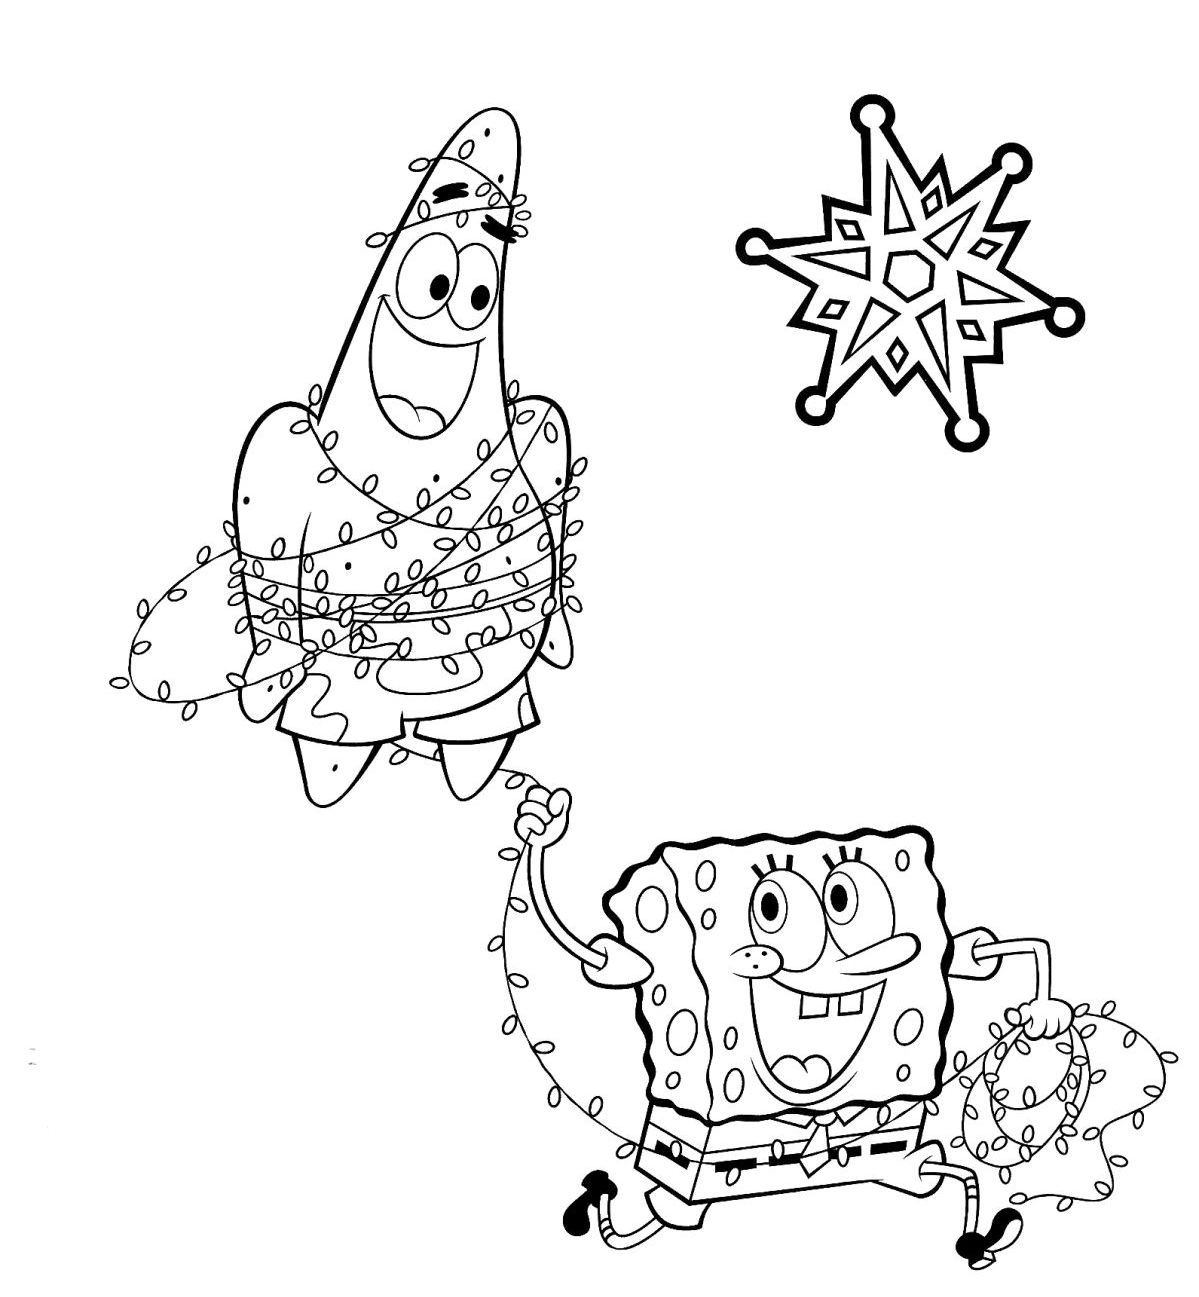 Sponge Bob Christmas Coloring Page - Coloring Pages for Kids and ...